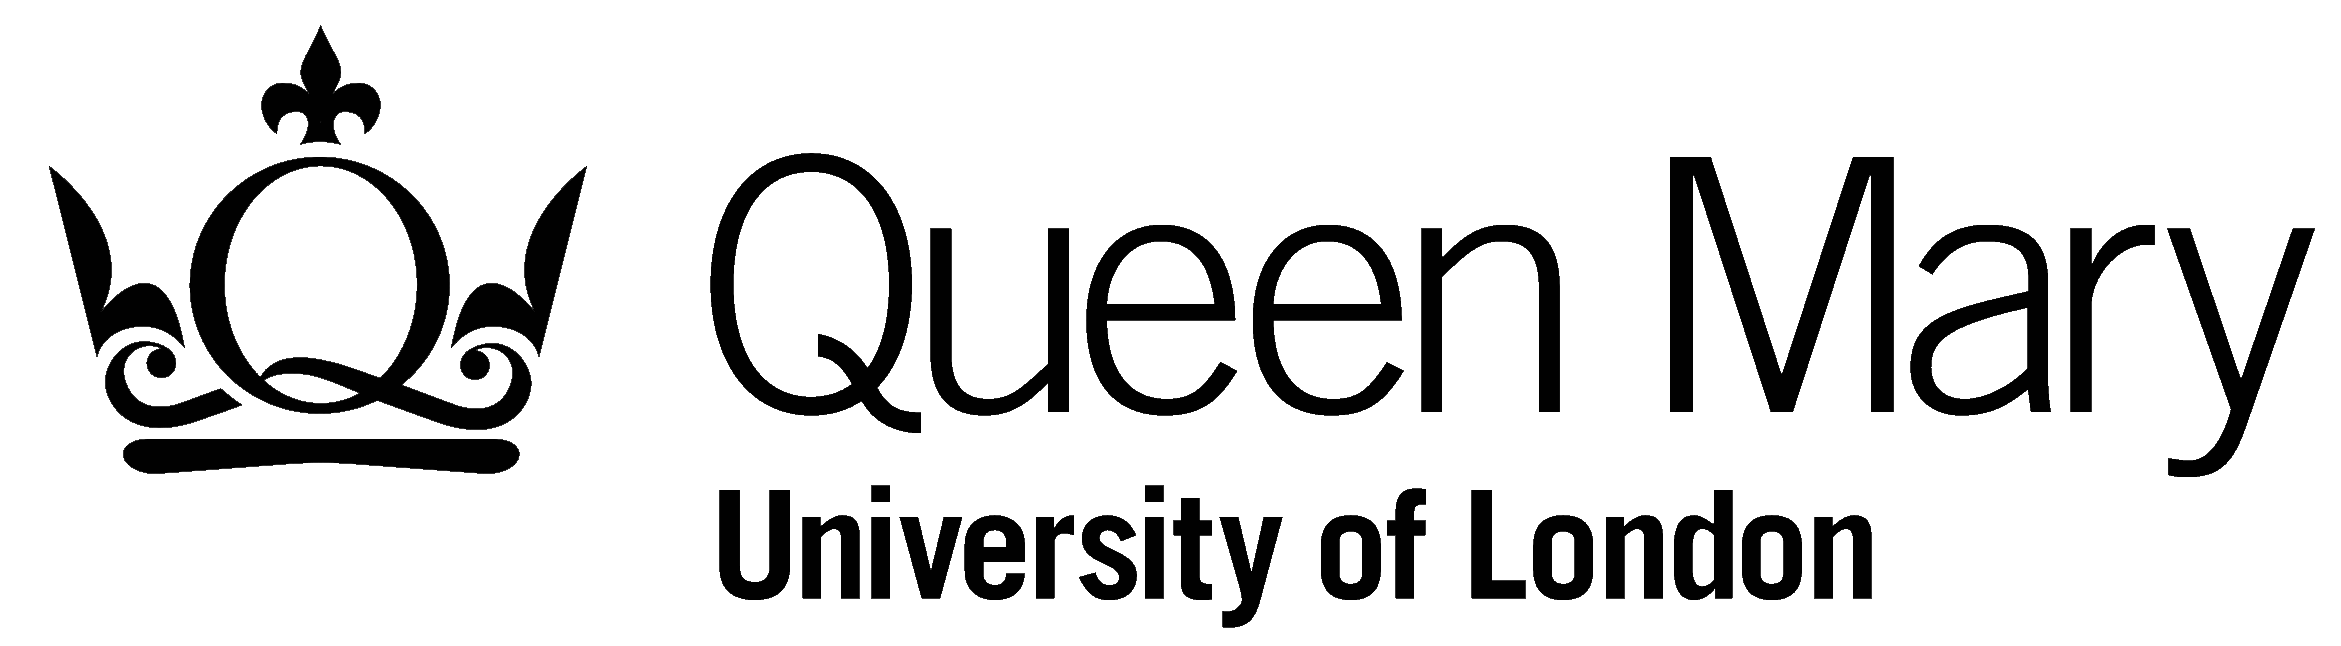 Centre for Commercial Law Studies, Queen Mary University of London